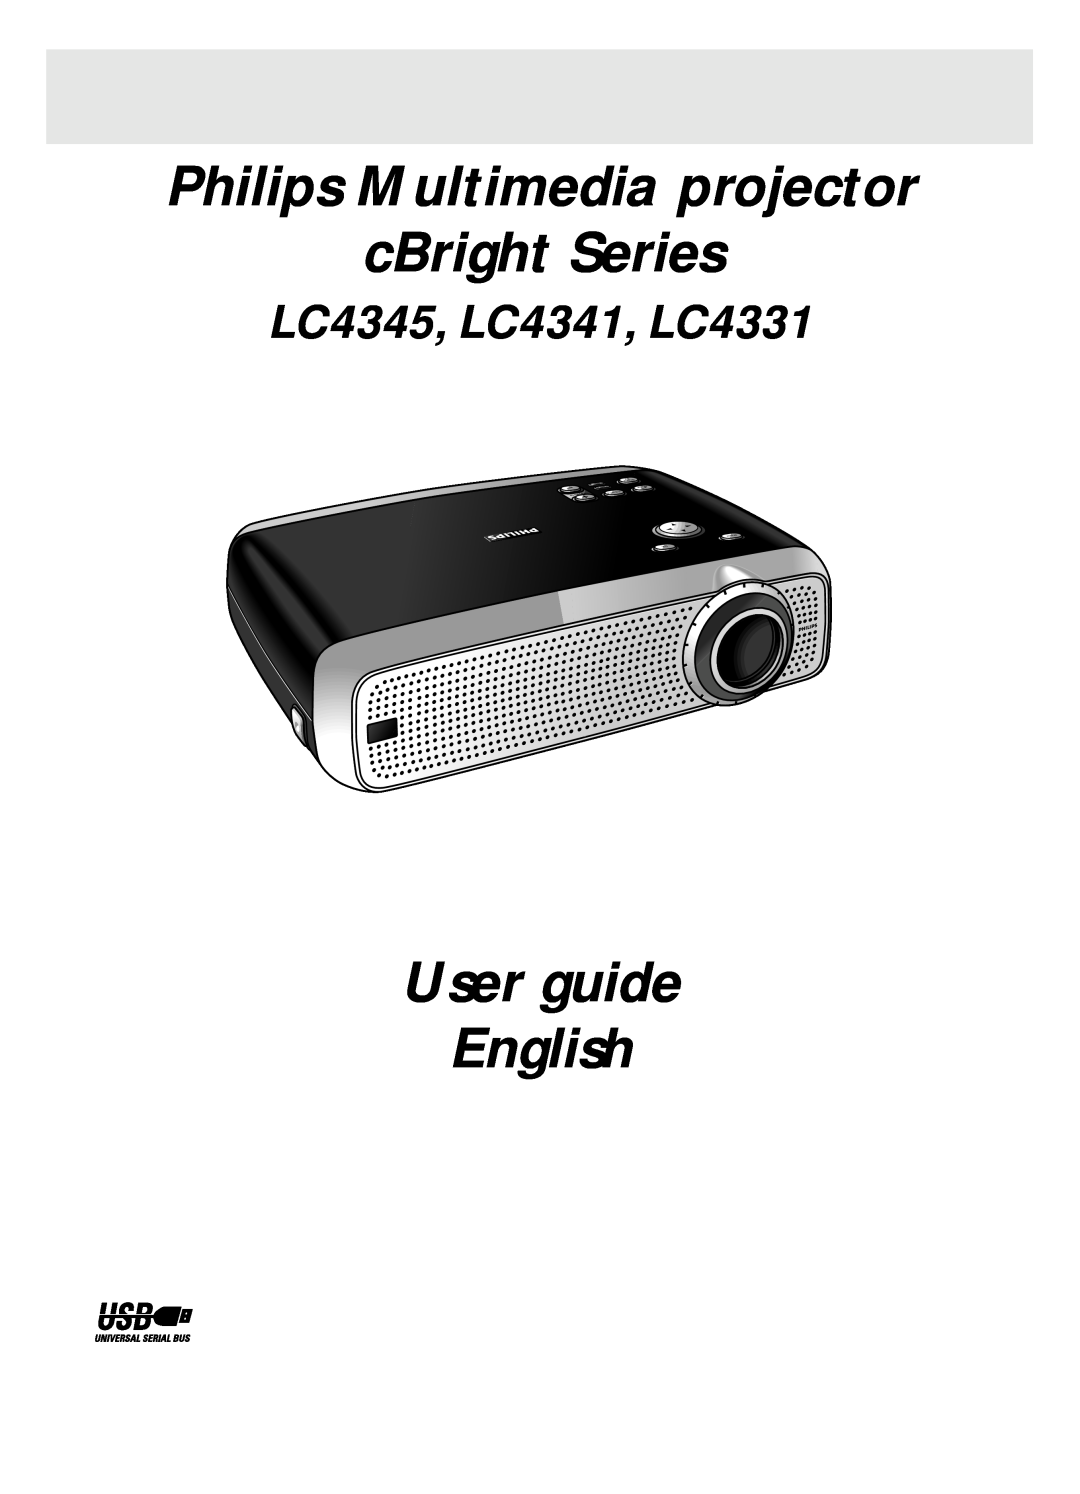 Philips manual Philips Multimedia projector cBright Series, User guide English, LC4345, LC4341, LC4331 